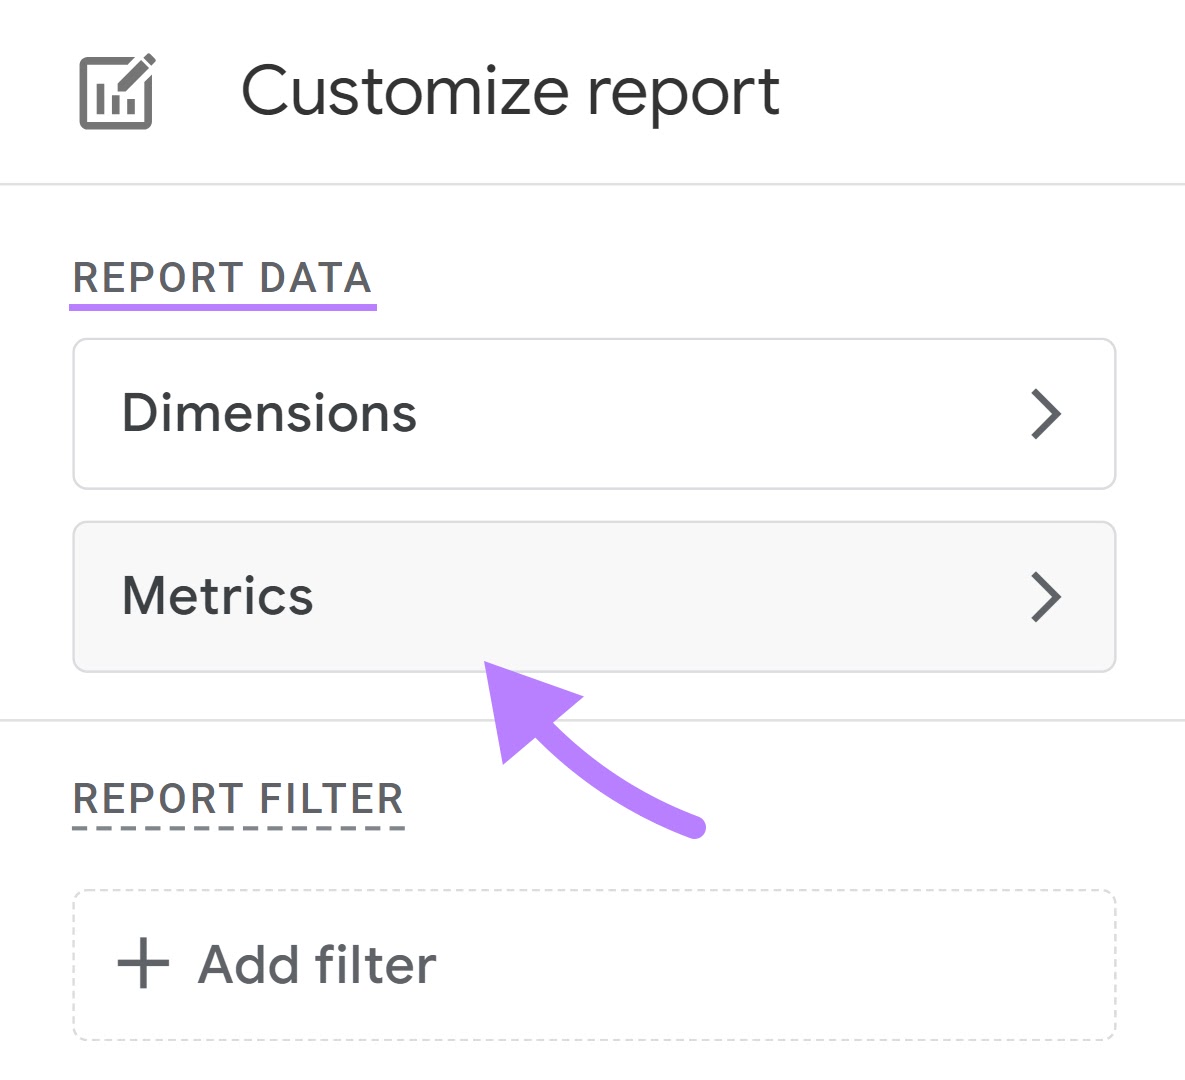 "Metrics" selected under “Report Data” section